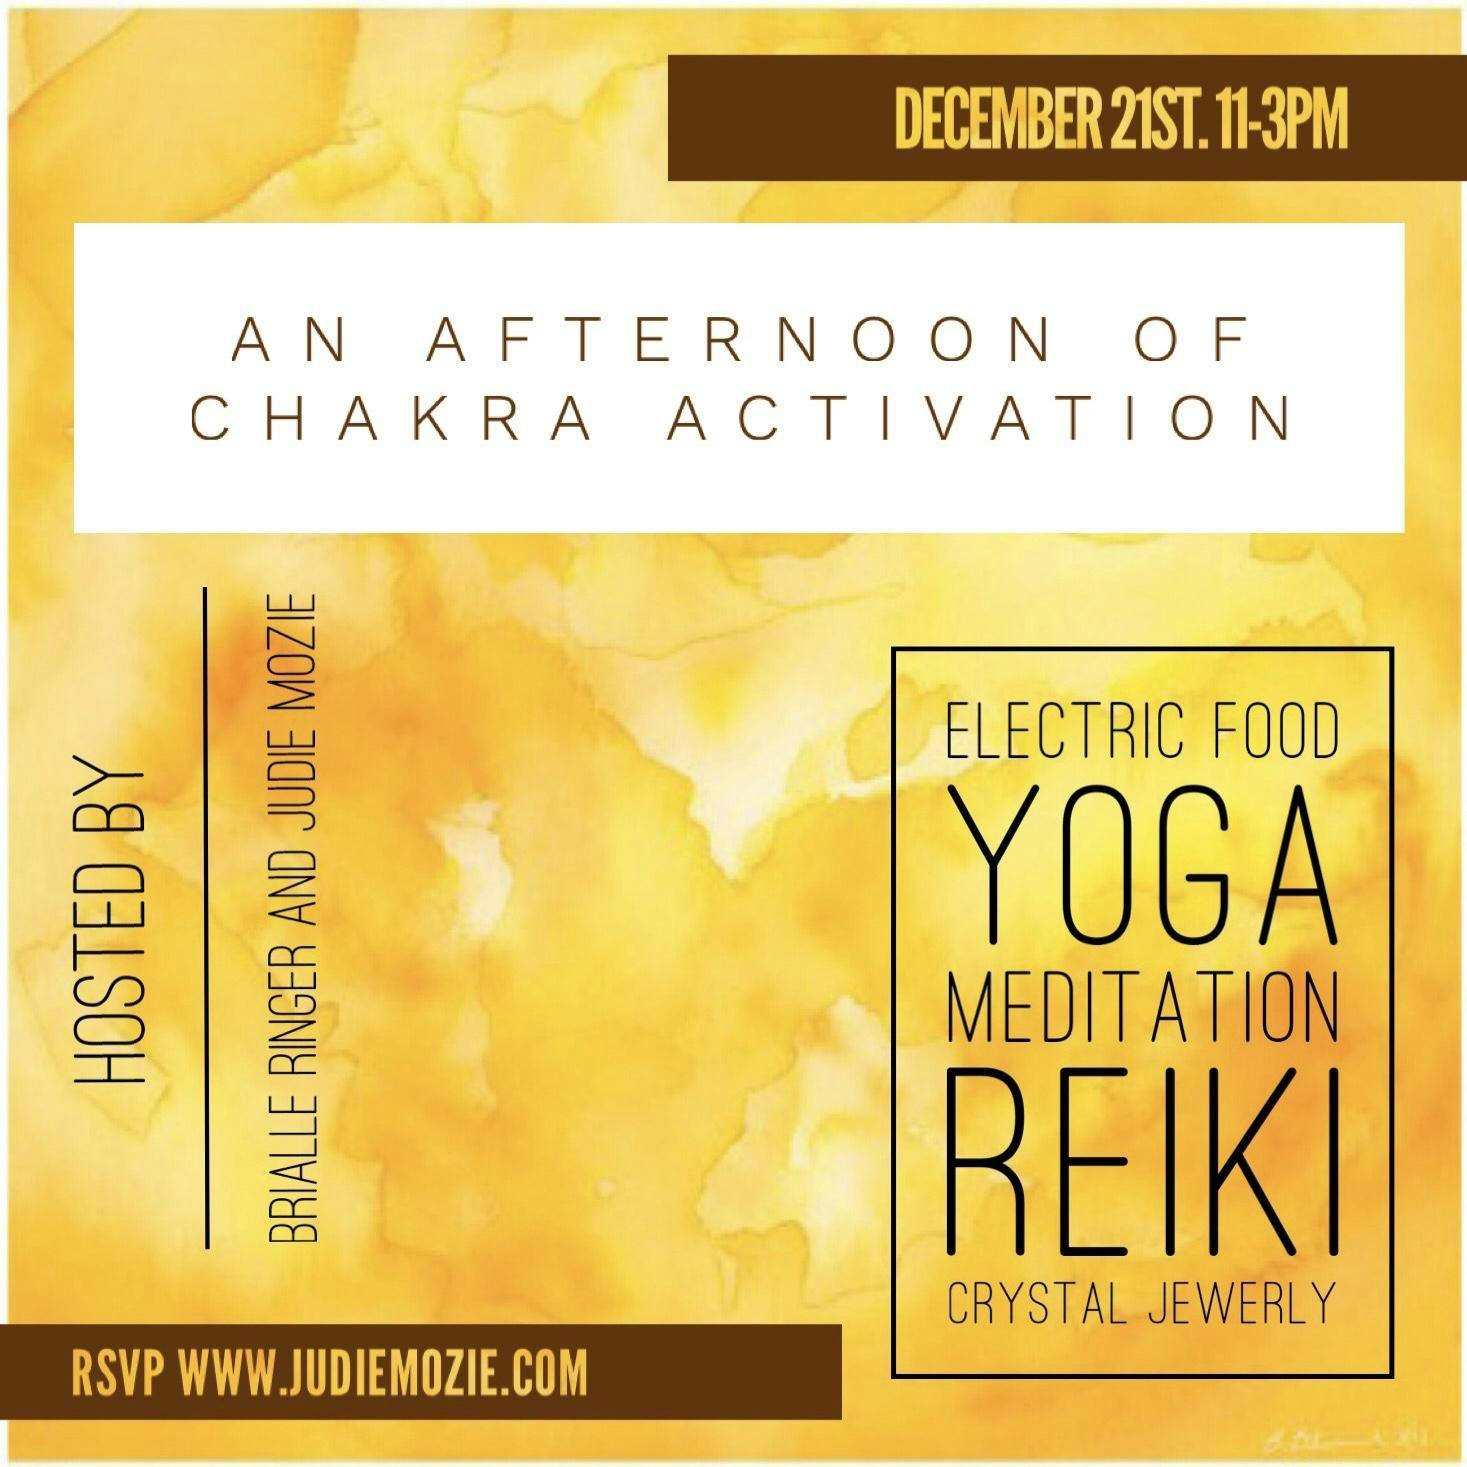 An Afternoon of Chakra Activation